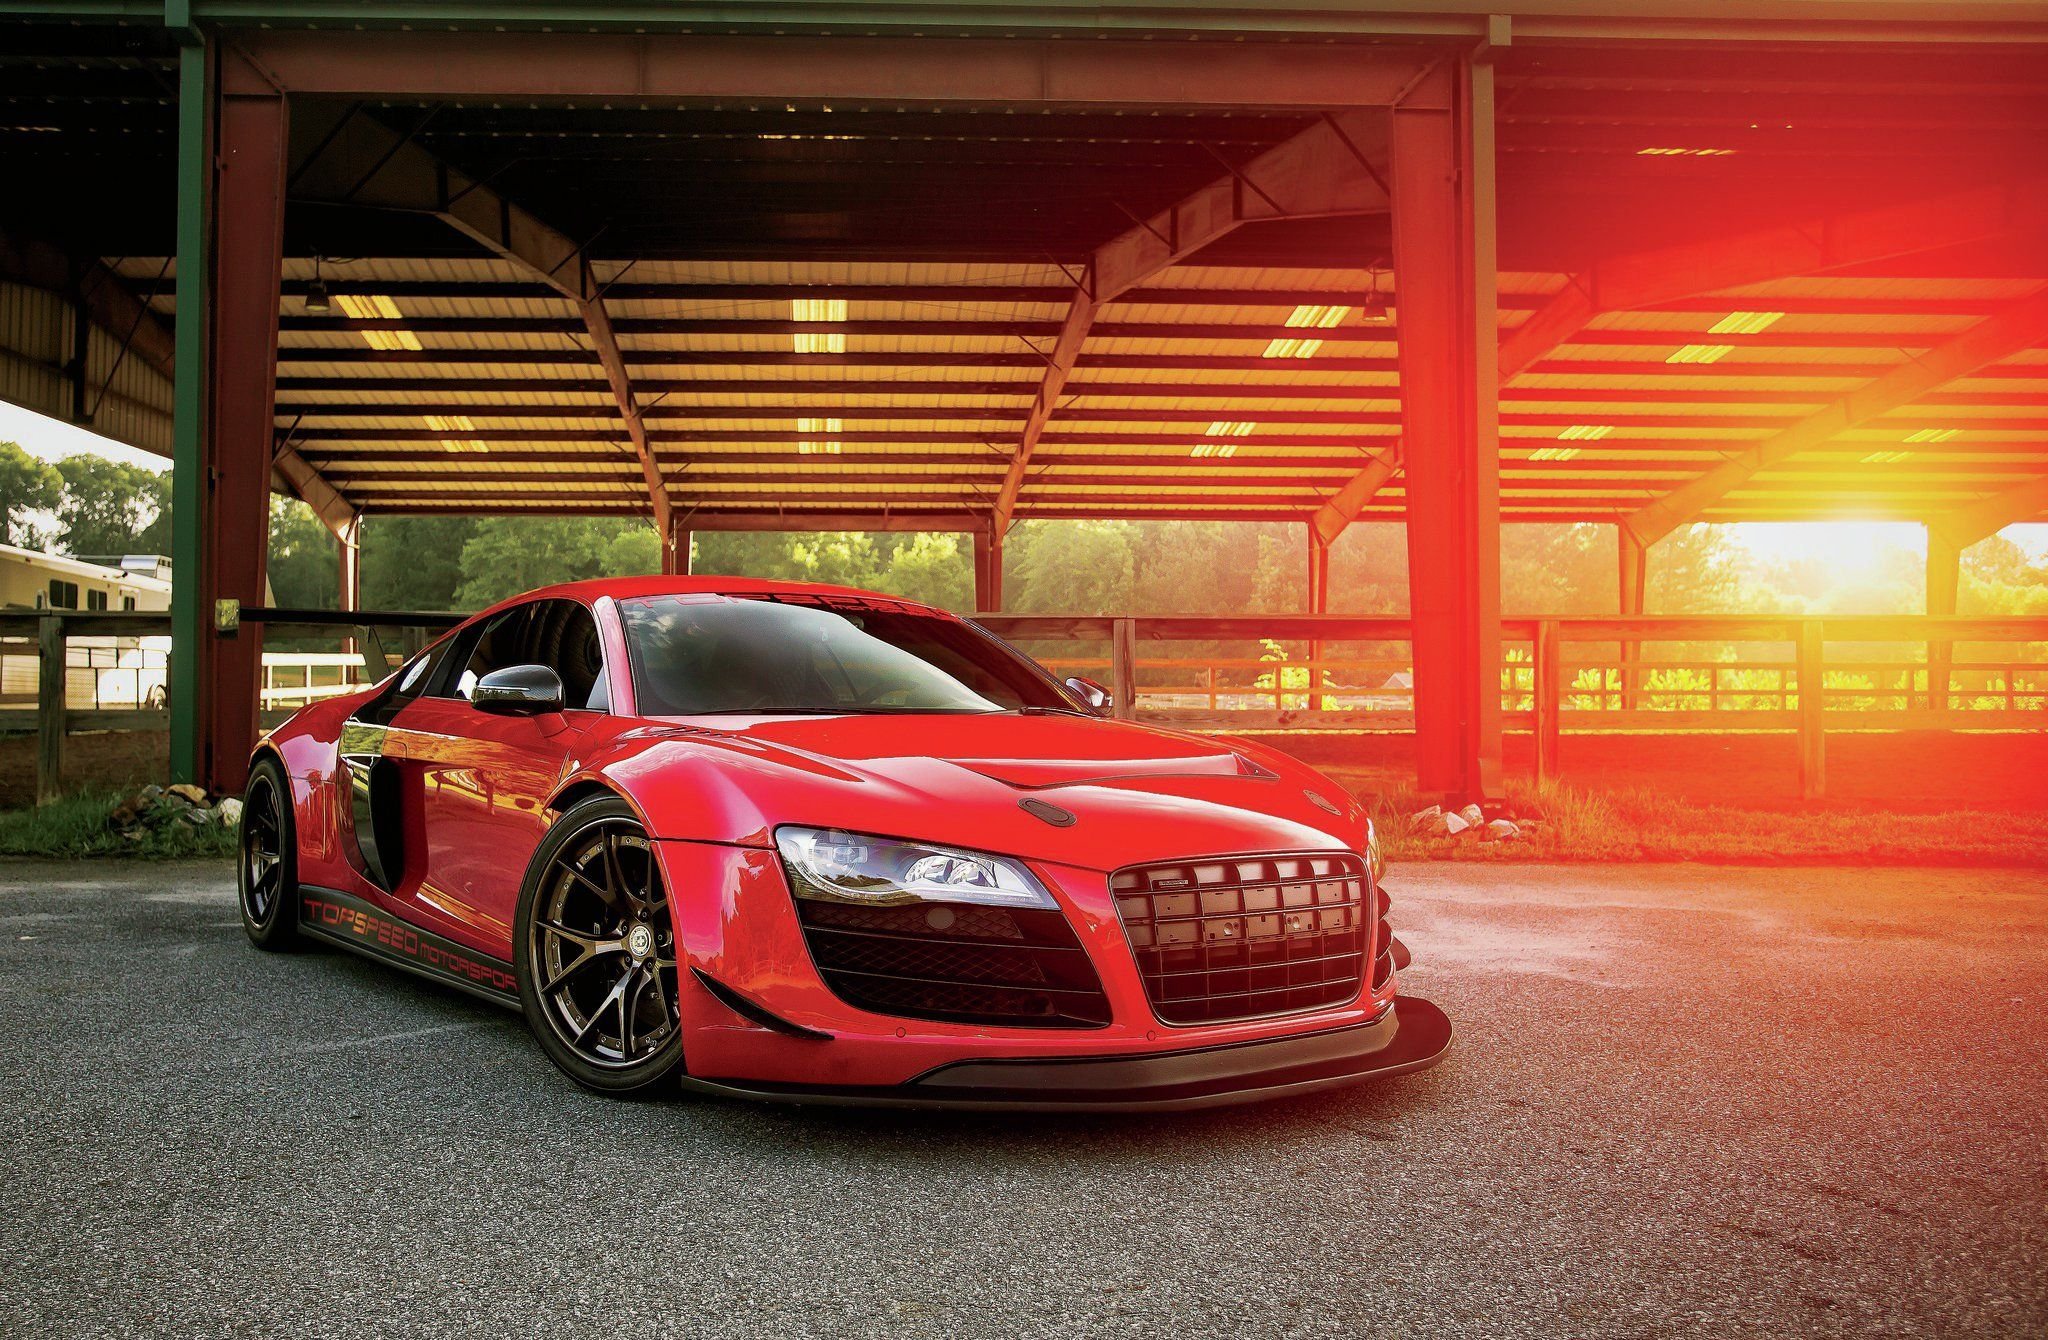 2011, Audi, R, 8, Tuning, Bodykit, Coupe, Supercars, Cars Wallpaper